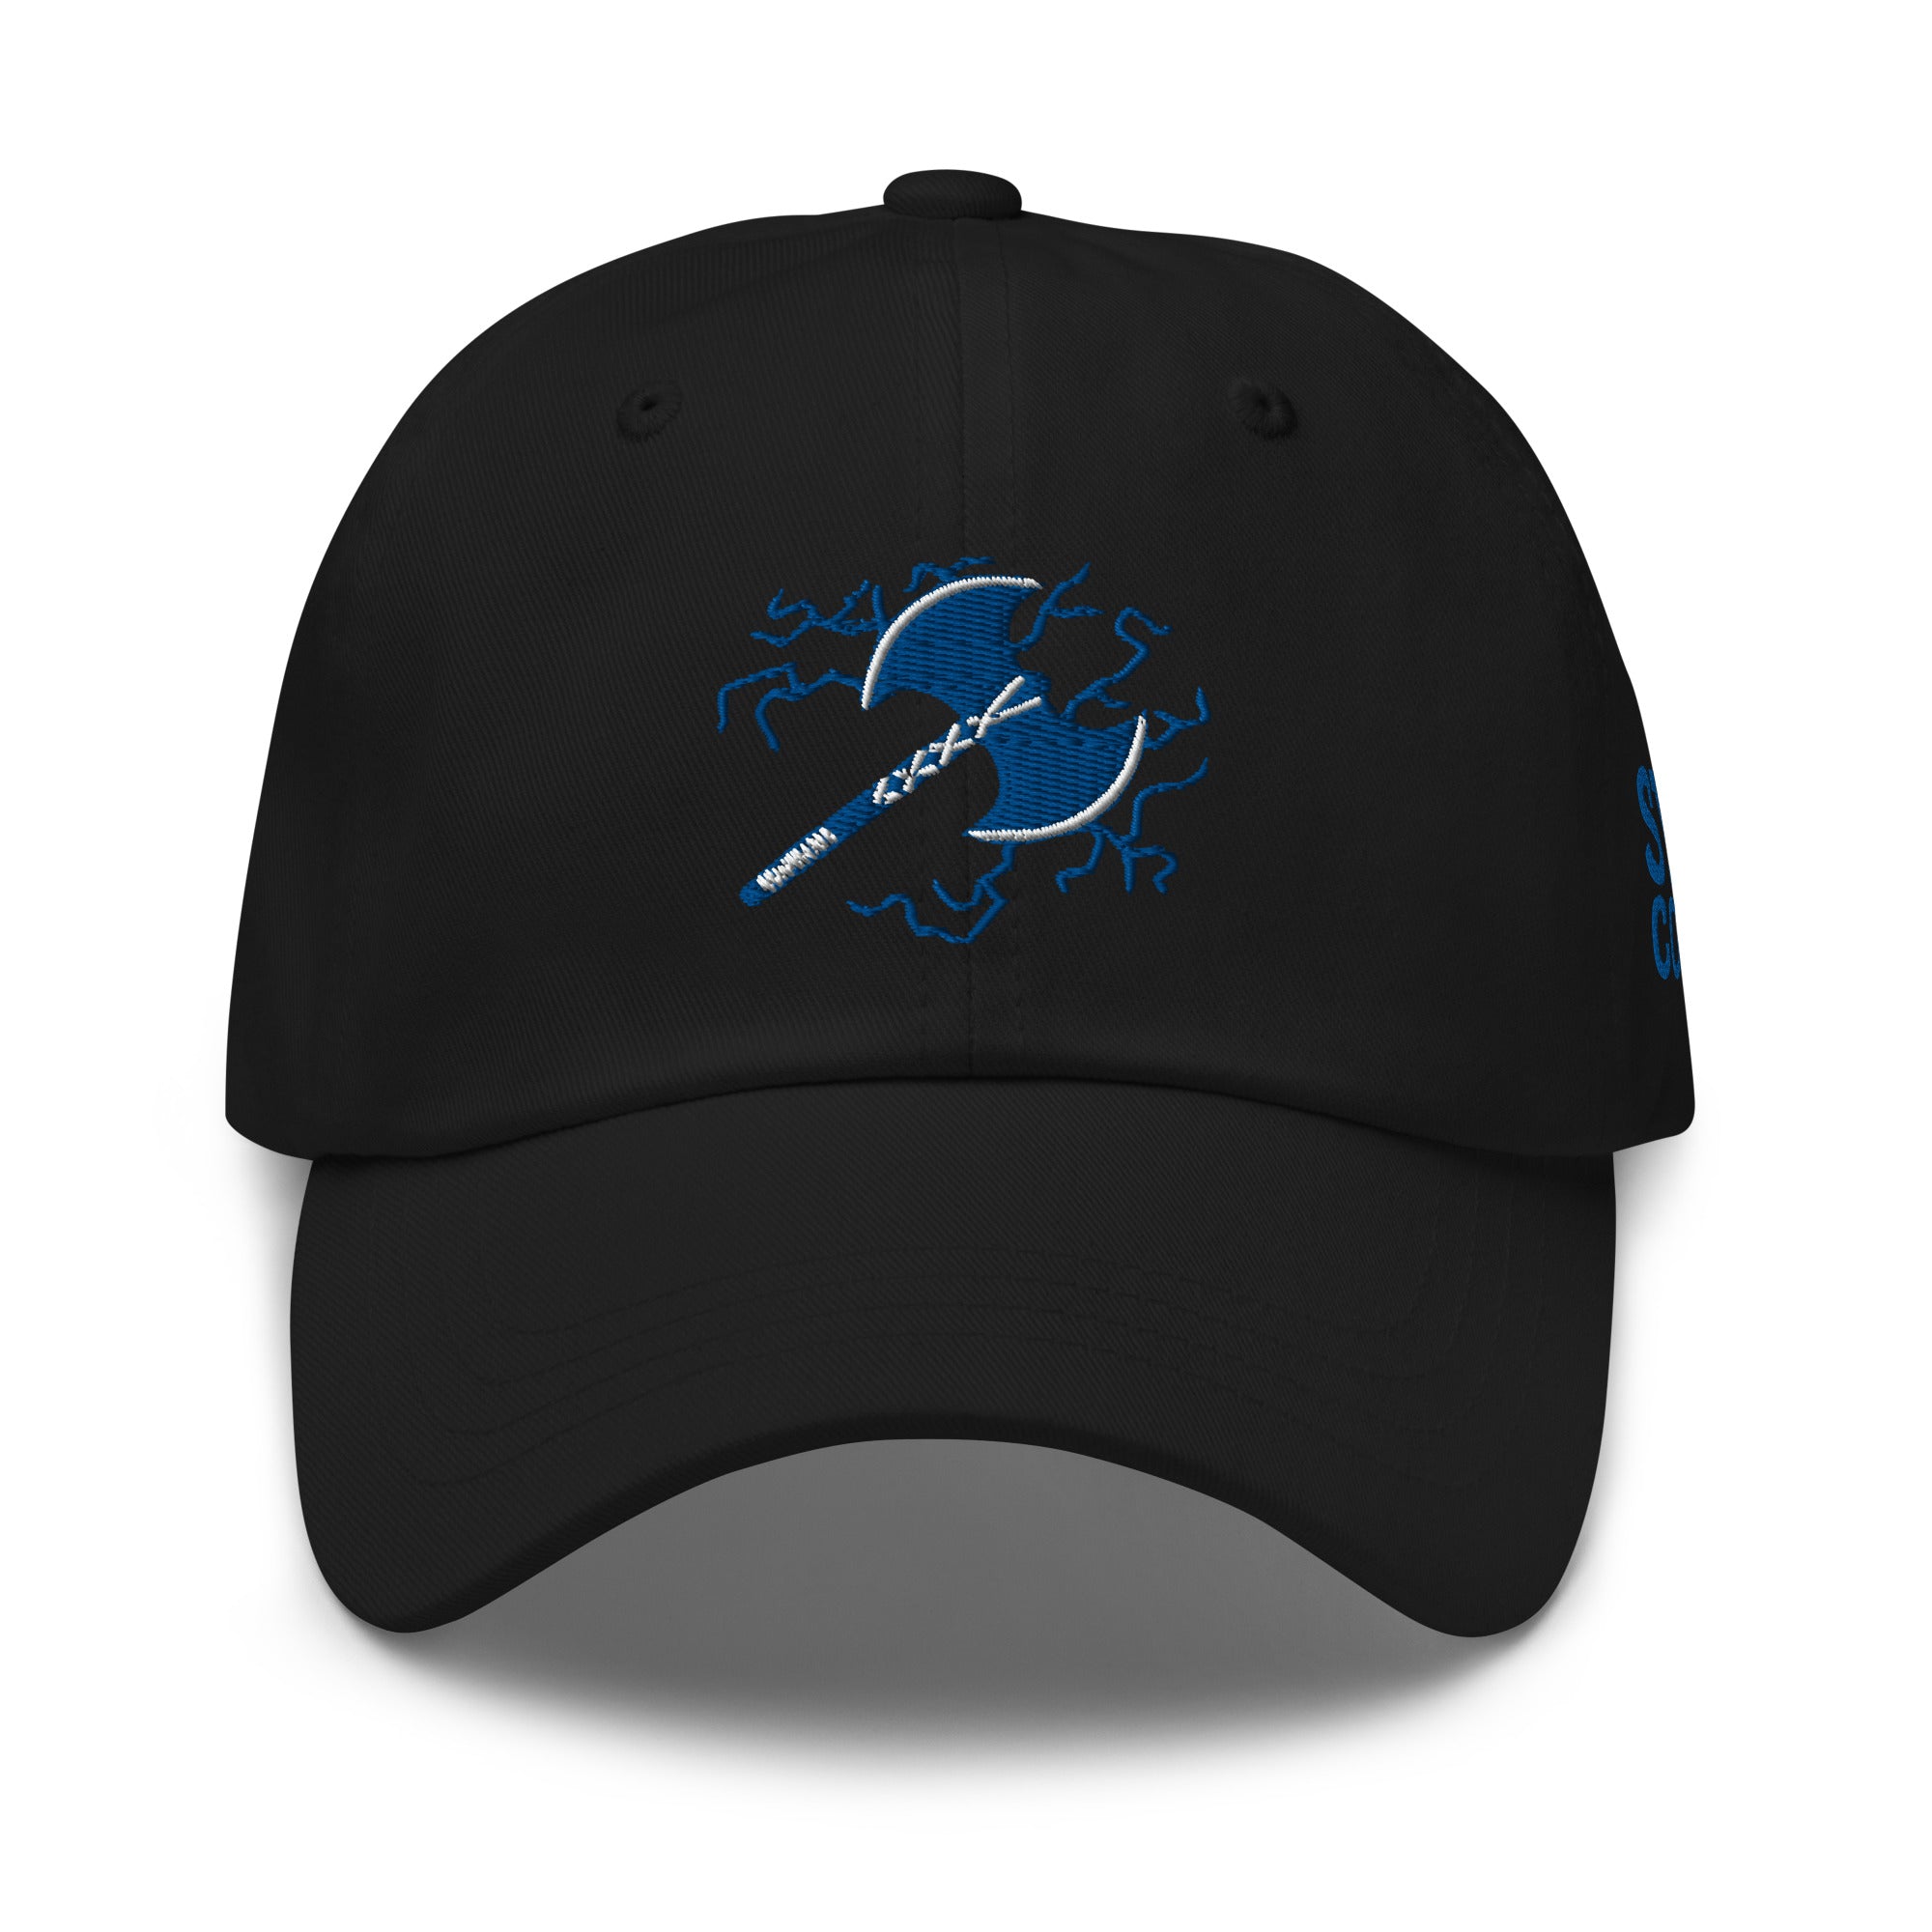 Storm Company in Blue Dad hat